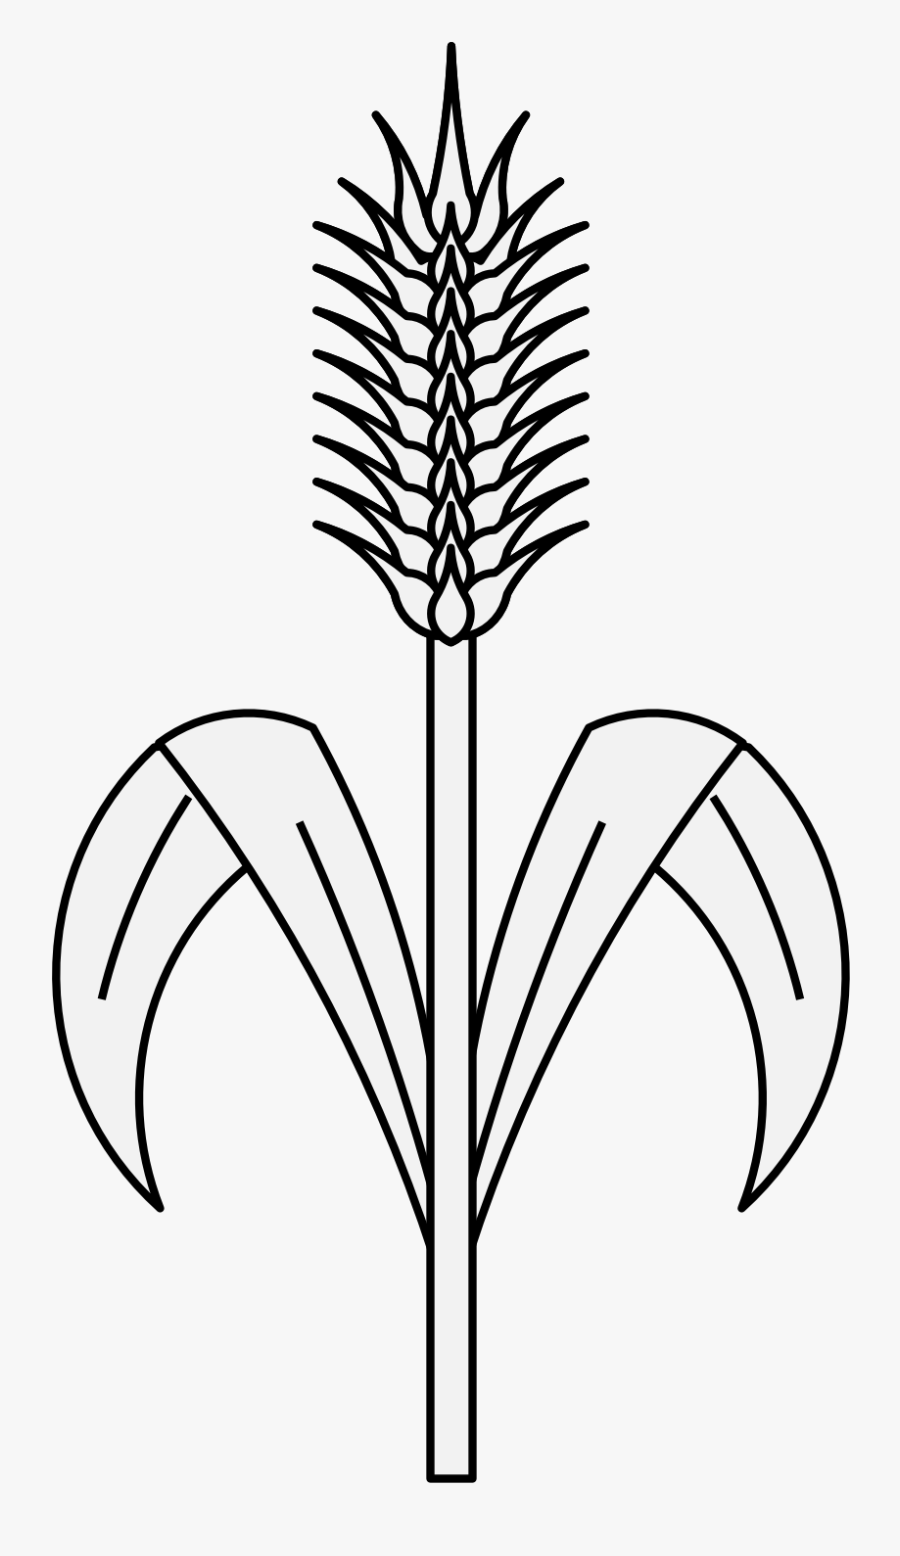 Clip Art How To Draw Wheat - Wheat Traceable, Transparent Clipart